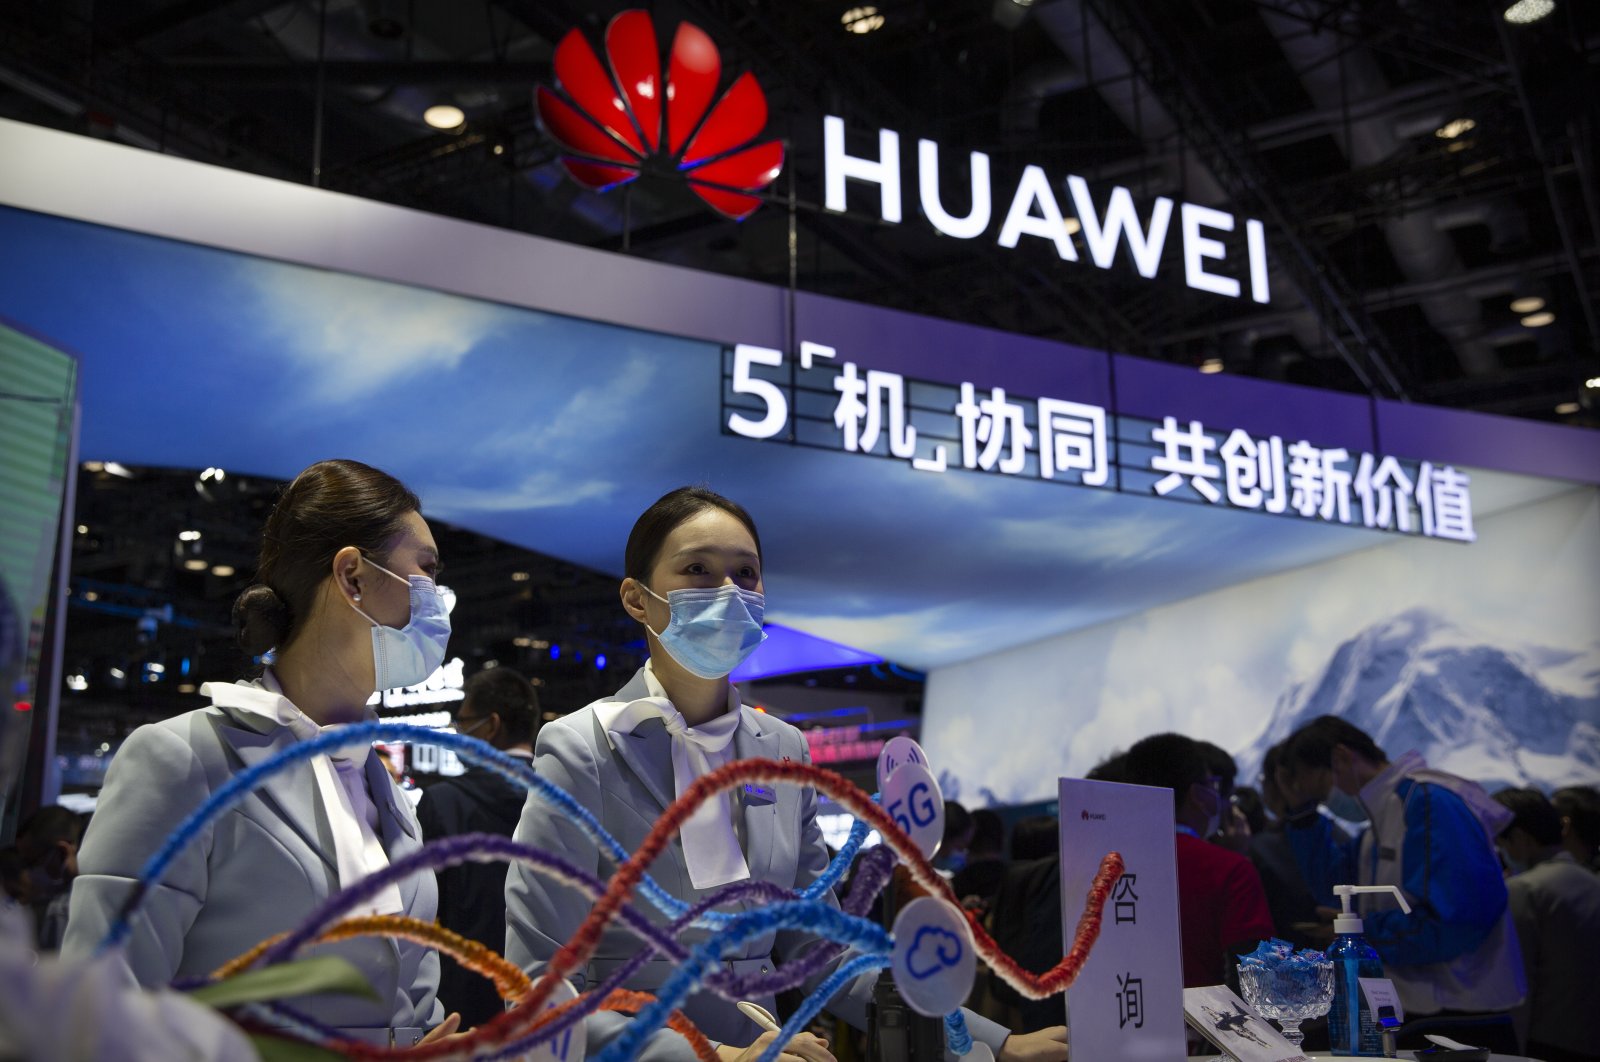 Staff members wearing masks to protect against the coronavirus stand at a booth from Chinese technology firm Huawei at the PT Expo in Beijing, Oct. 14, 2020. (AP Photo)